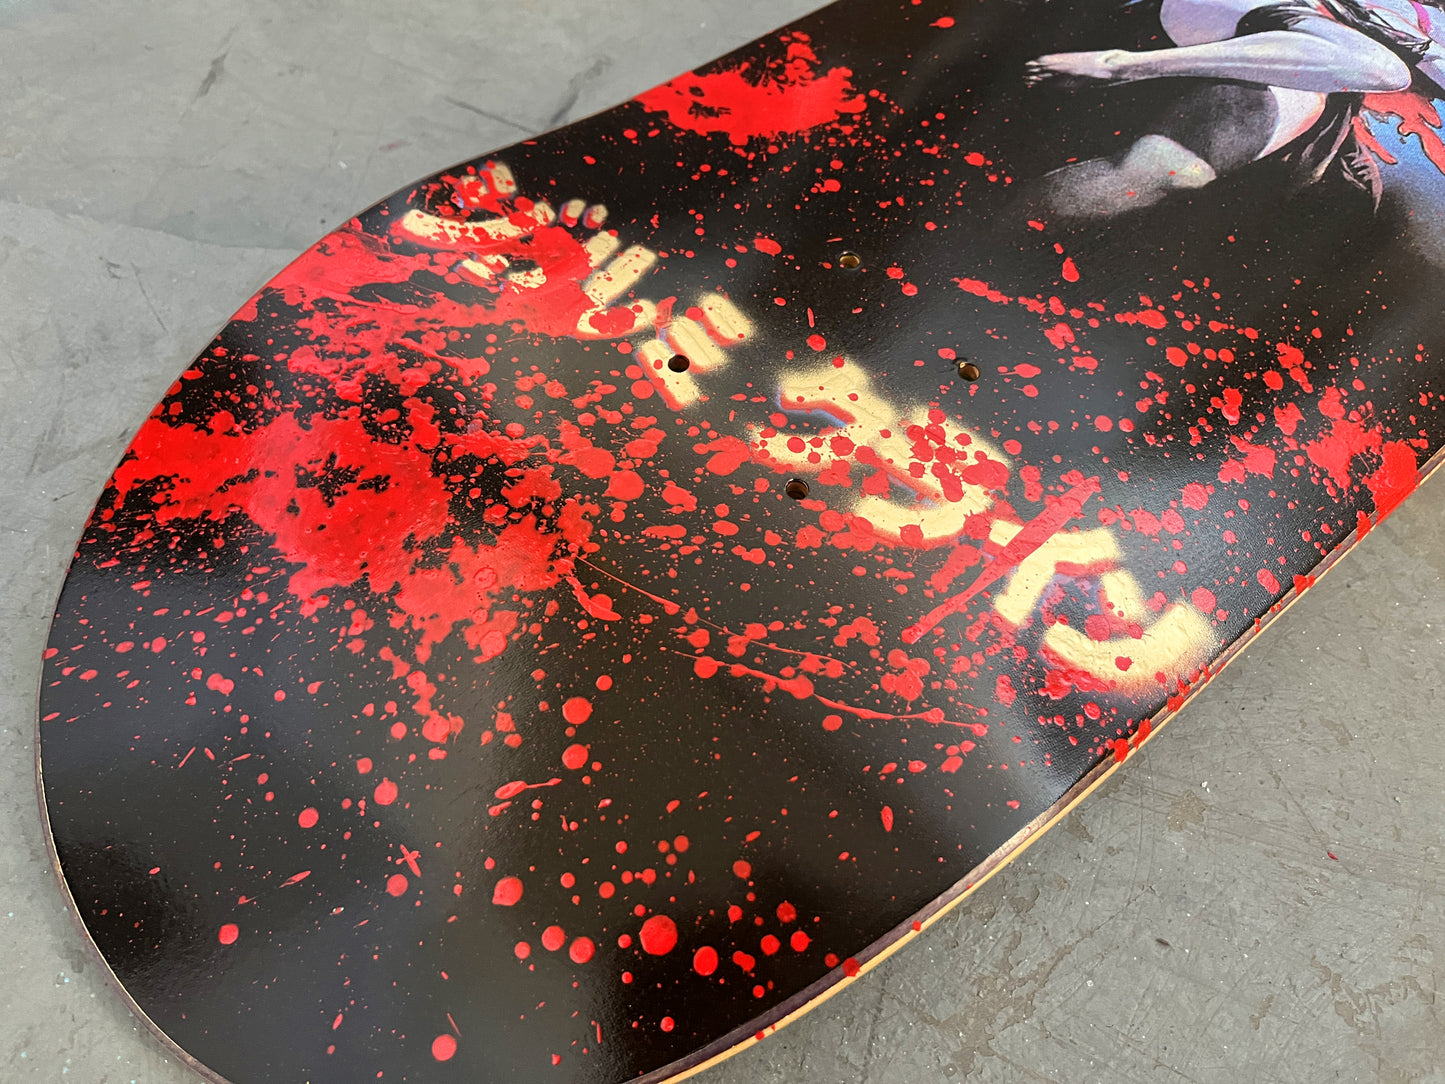 tokyo ripper 8.5 X 32 BLOOD EDITION SIGNED